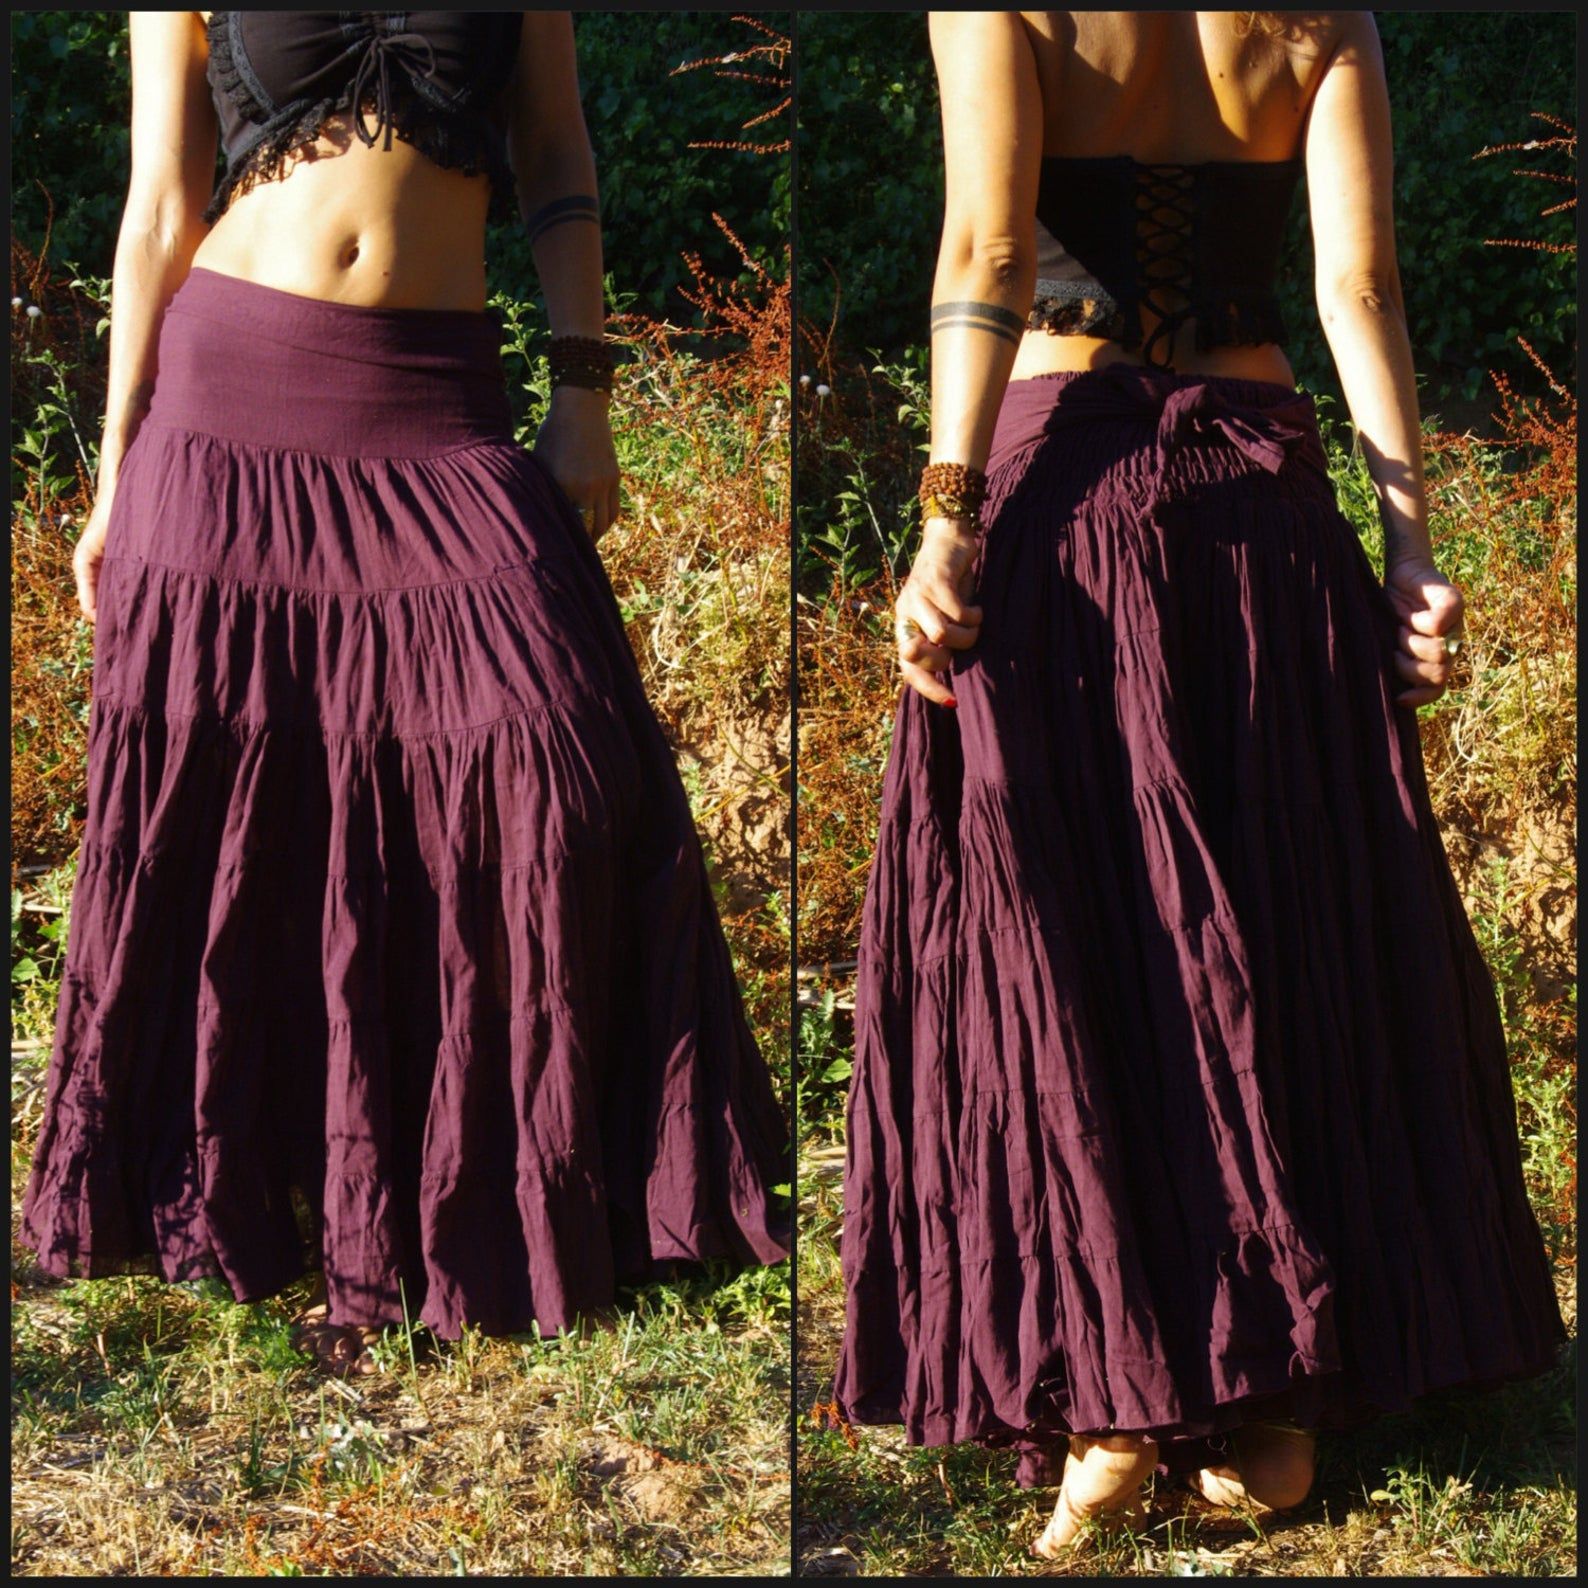 Add new trend to your fashion collection
with gypsy skirts